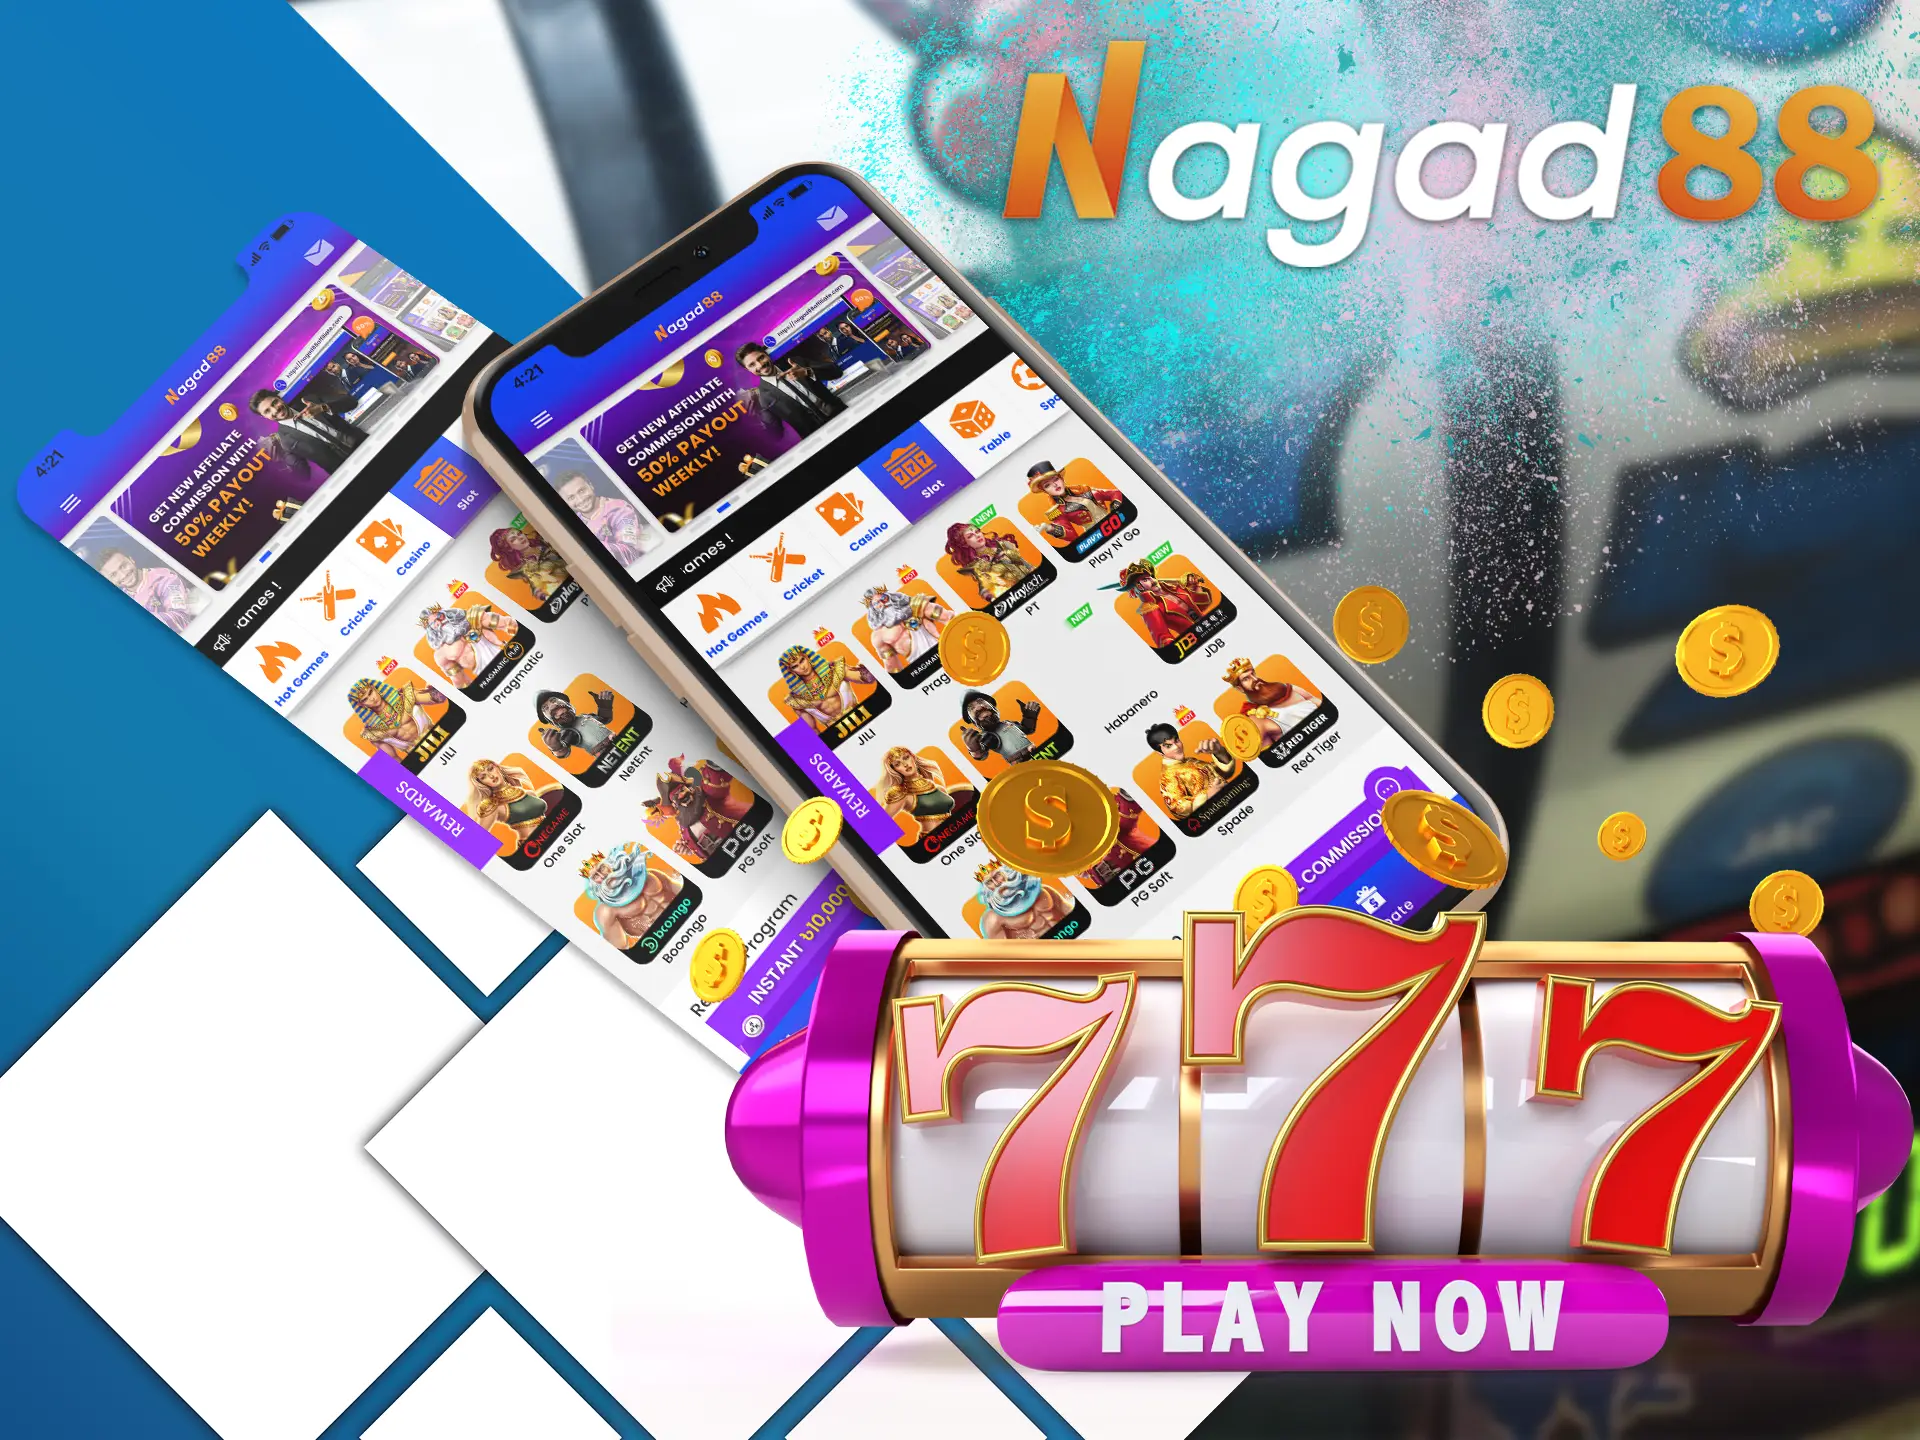 Enjoy an incredible experience that will make you immerse yourself 100% in the games at Nagad88.